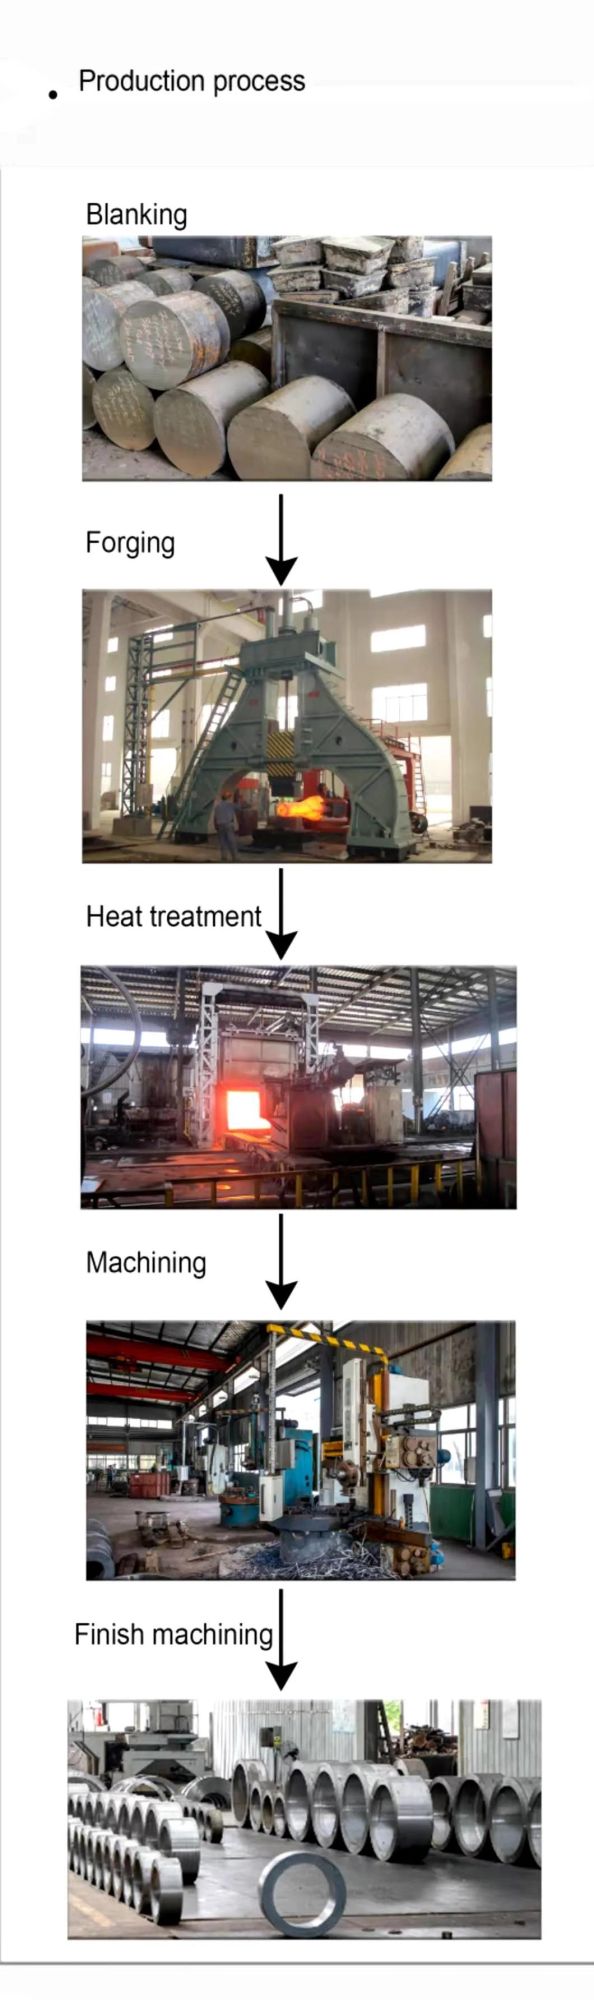 Hot Die Forging Process Steel Forging for Chemical, Petroleum Industries